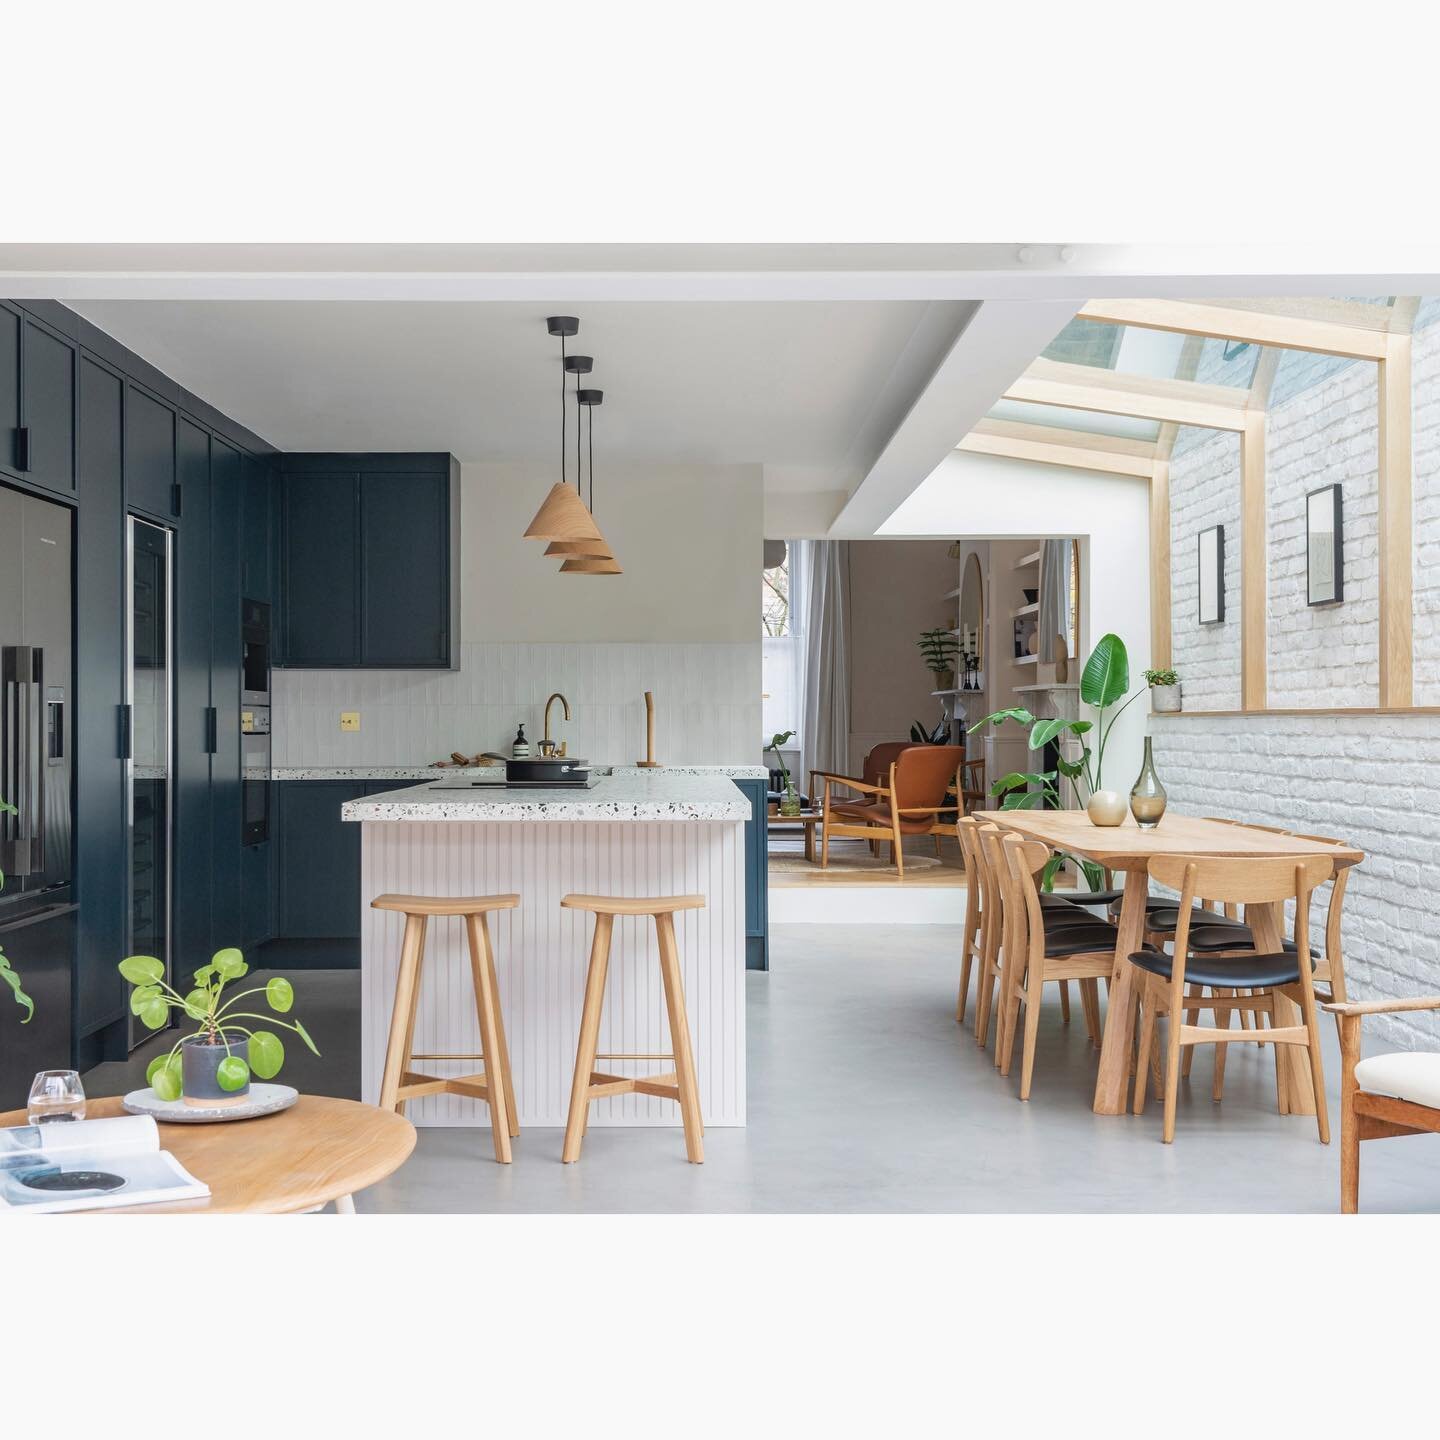 D U L W I C H  V I L L A G E

We worked with our awesome clients elevating their beautiful family home. 

We overhauled the top floors and entirely architecturally redesigned the ground floor including increasing the width of the kitchen helping to c